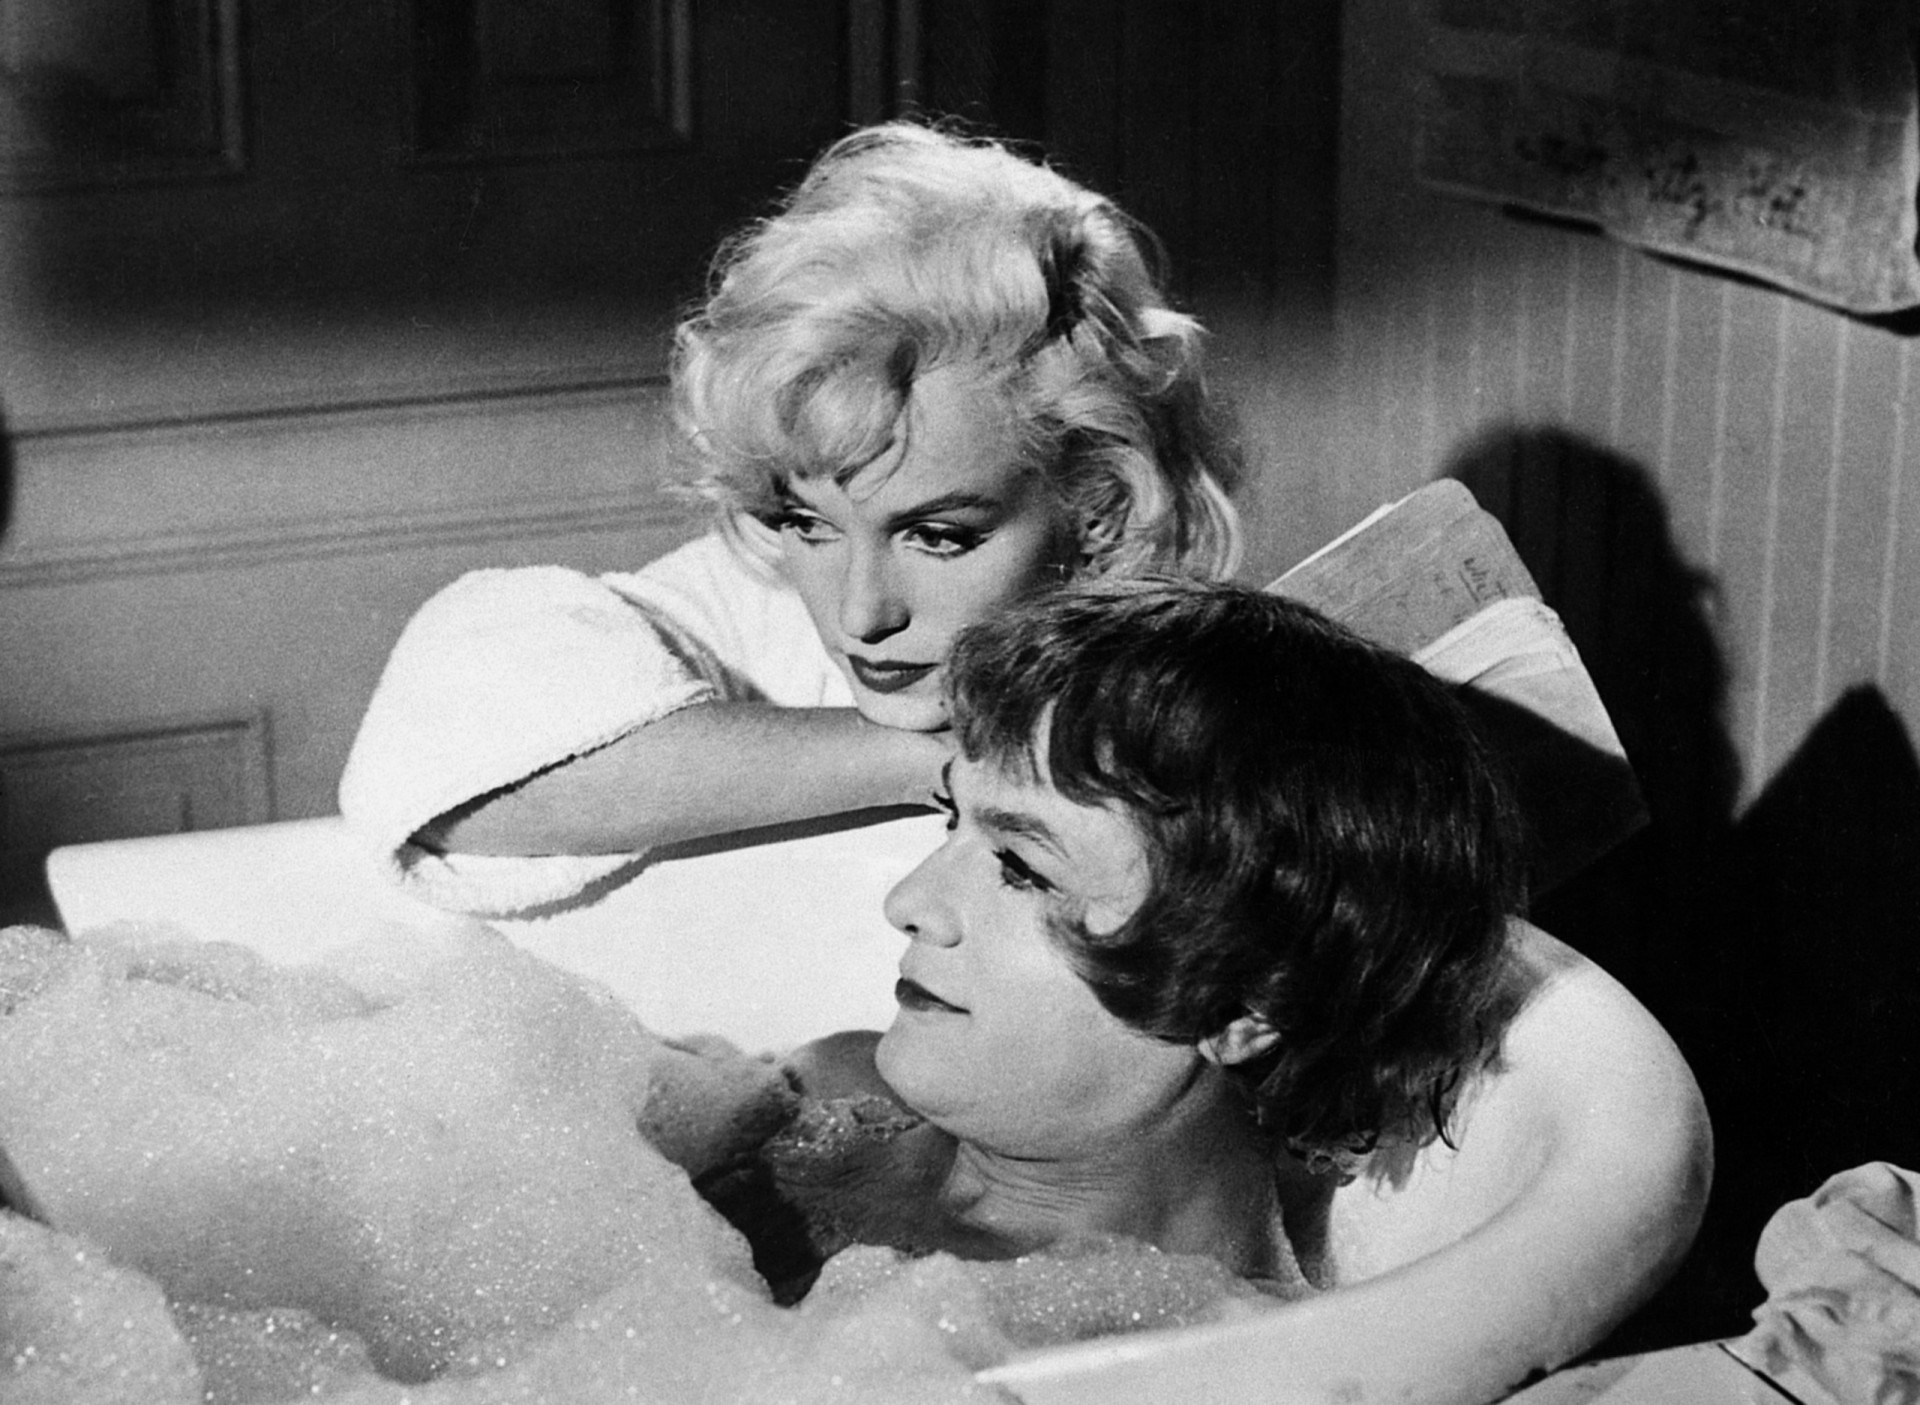 <p>One of the greatest films ever made, 'Some Like It Hot' features this tender bathtub scene with Josephine—really Joe (Tony Curtis)—and Sugar Kane Kowalczyk (Marilyn Monroe).</p><p><a href="https://www.msn.com/en-us/community/channel/vid-7xx8mnucu55yw63we9va2gwr7uihbxwc68fxqp25x6tg4ftibpra?cvid=94631541bc0f4f89bfd59158d696ad7e">Follow us and access great exclusive content every day</a></p>